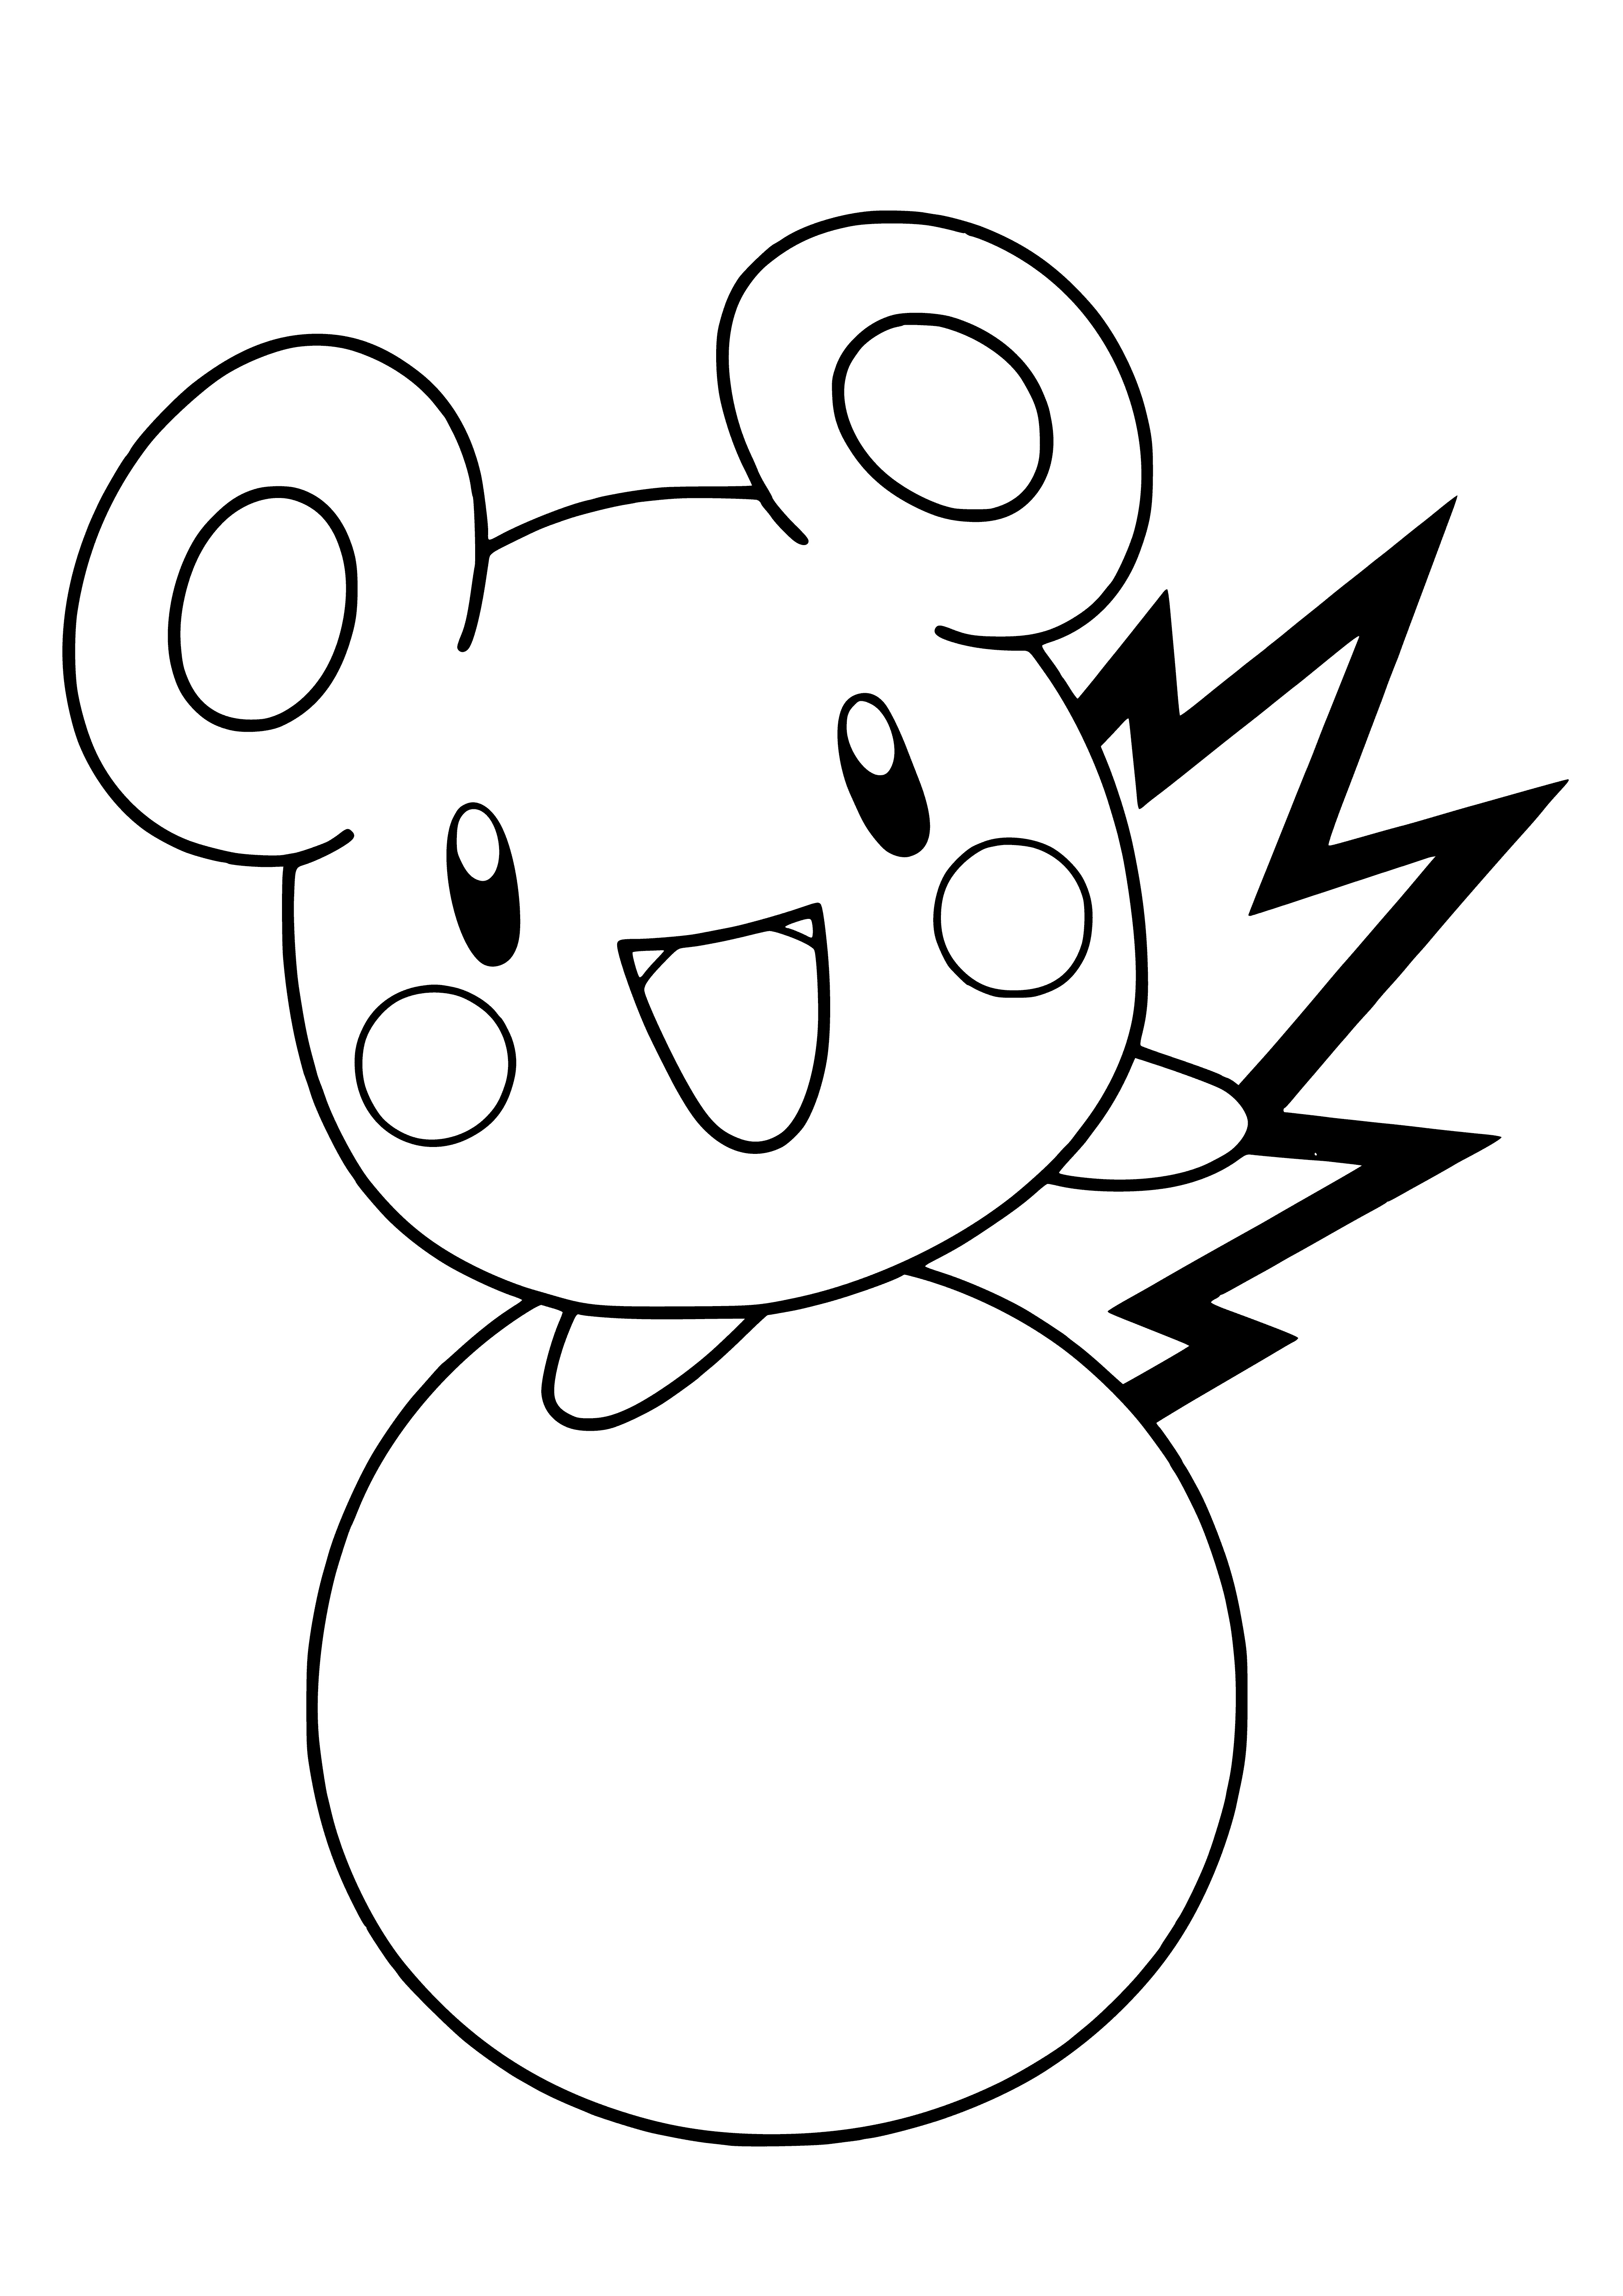 coloring page: Azuril is a small, round blue Pokemon w/white belly, large head & big blue eyes. Evolves to Pikachu.